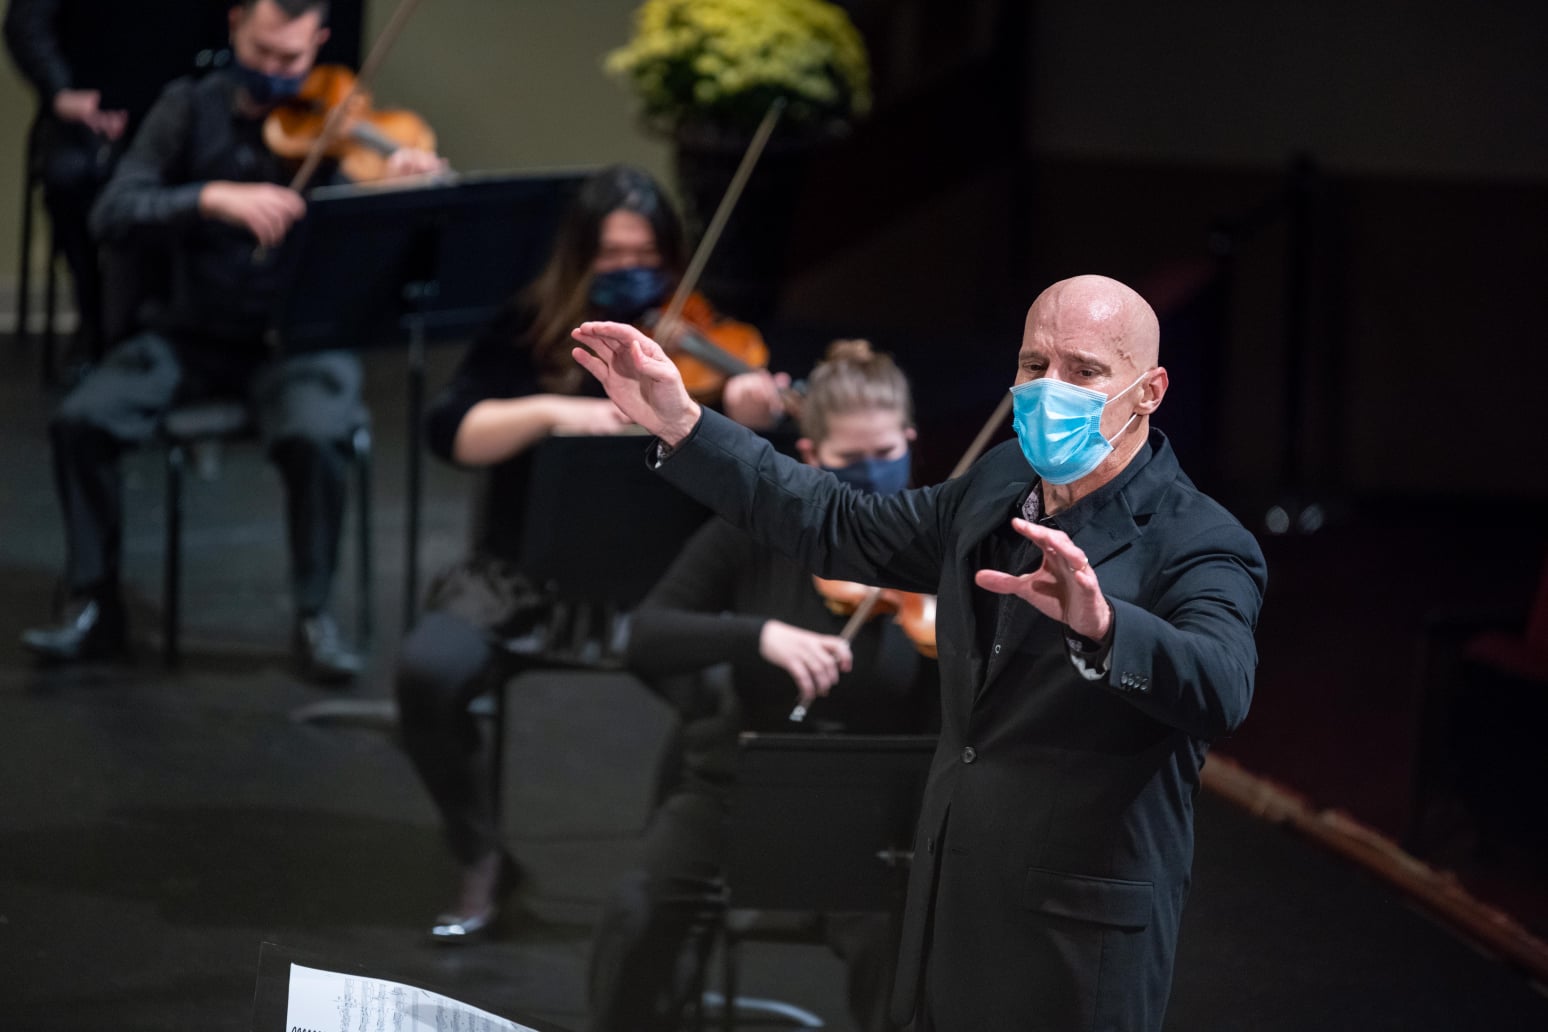 Maestro Mark Russell Smith conducting the QCSO wearing a mask at Davenport's Adler Theatre.